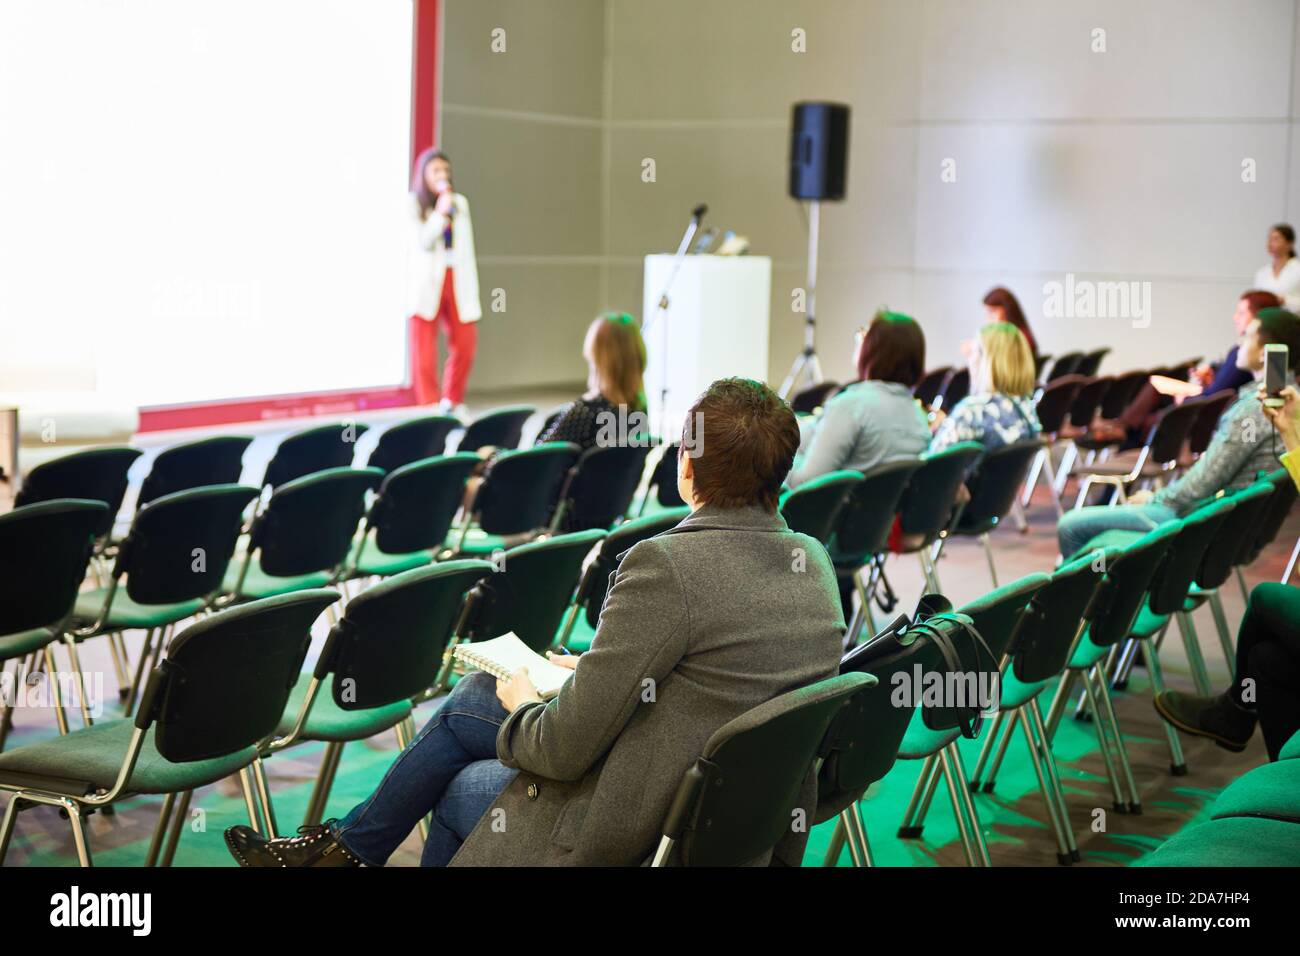 People at a training lecture at a conference Stock Photo